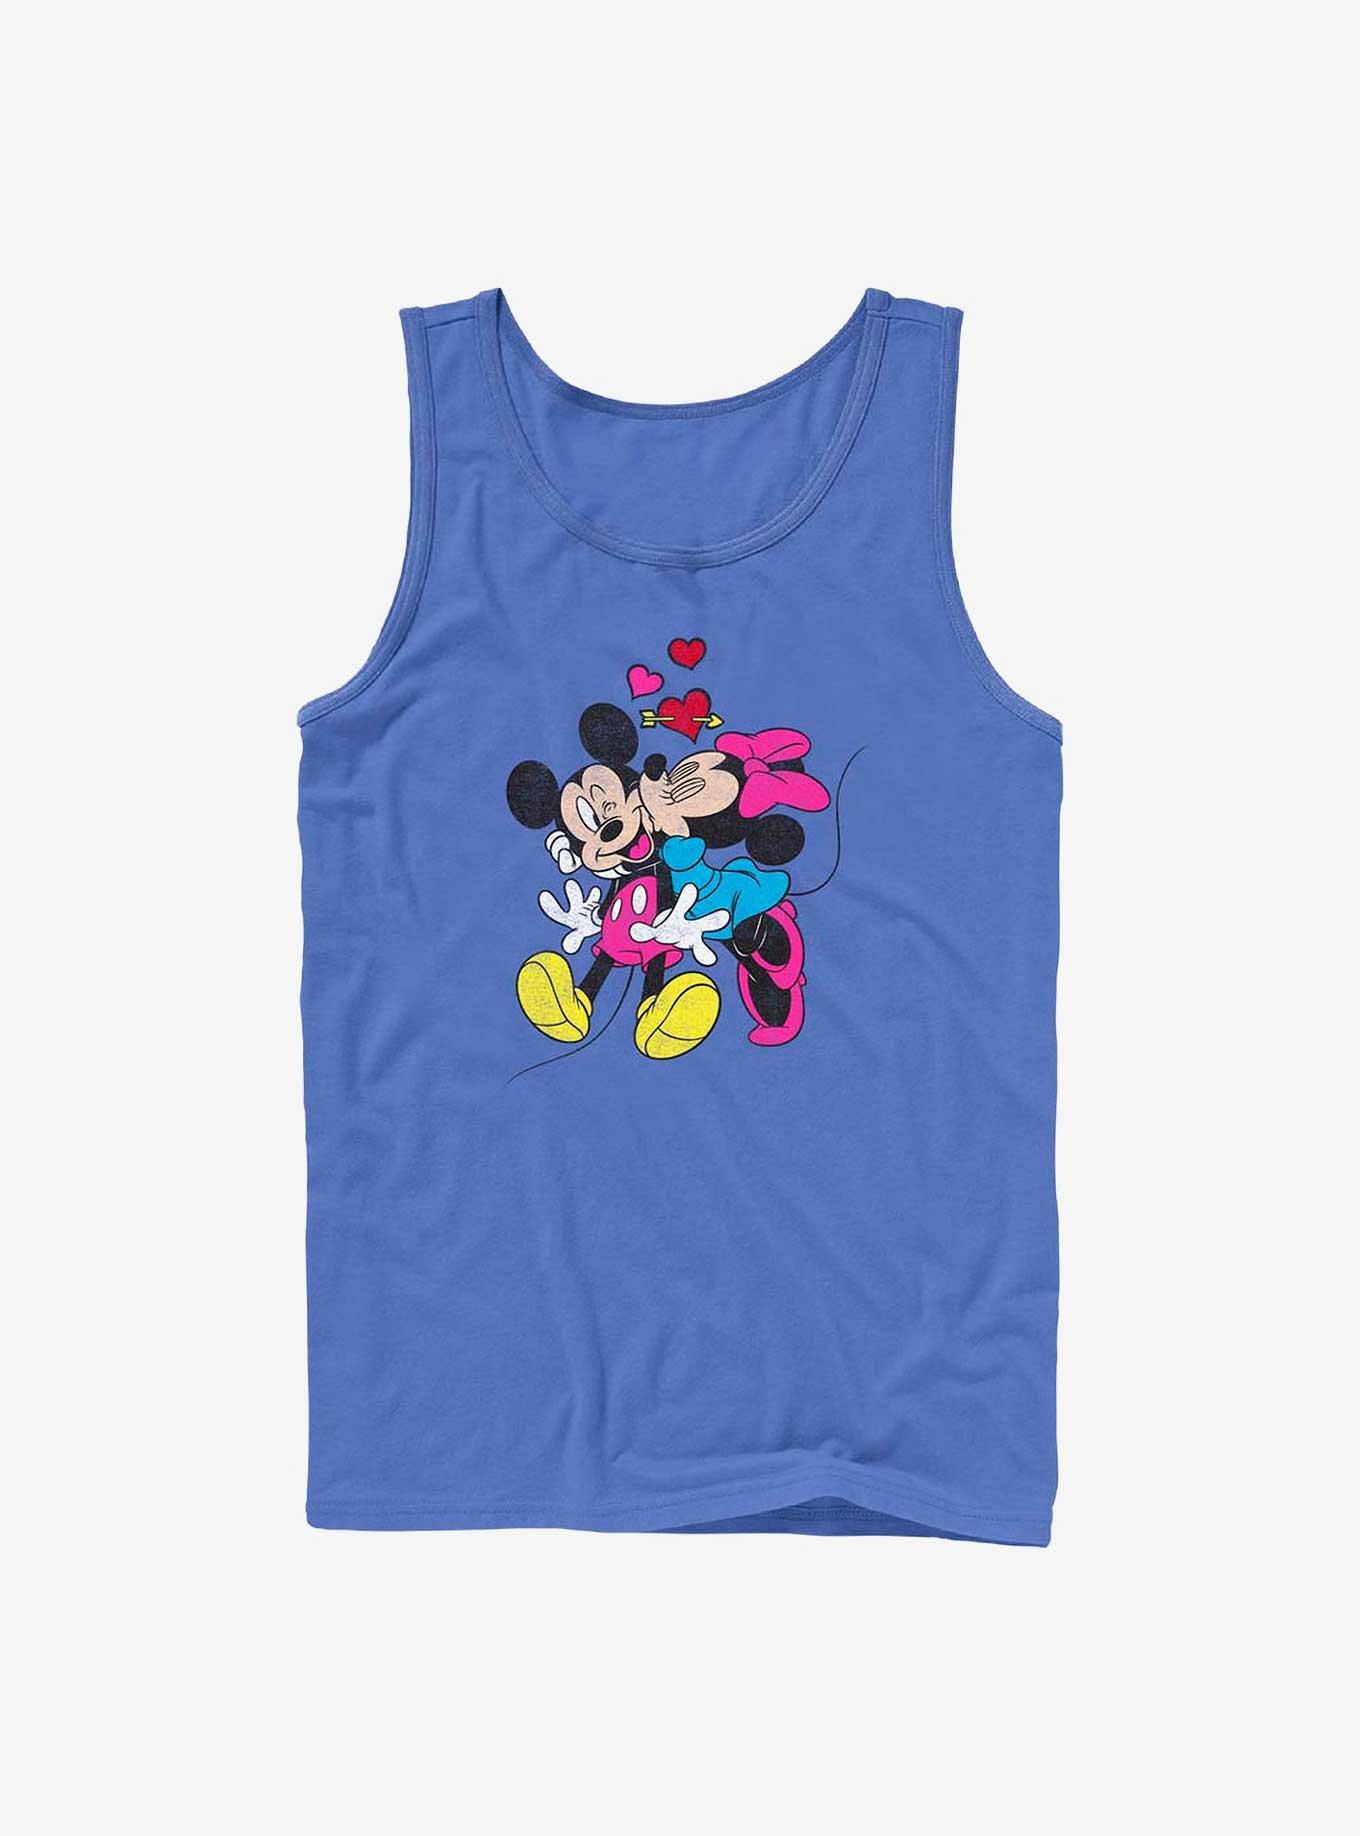 Disney Mickey Mouse & Minnie Mouse Love Tank Top - BLUE